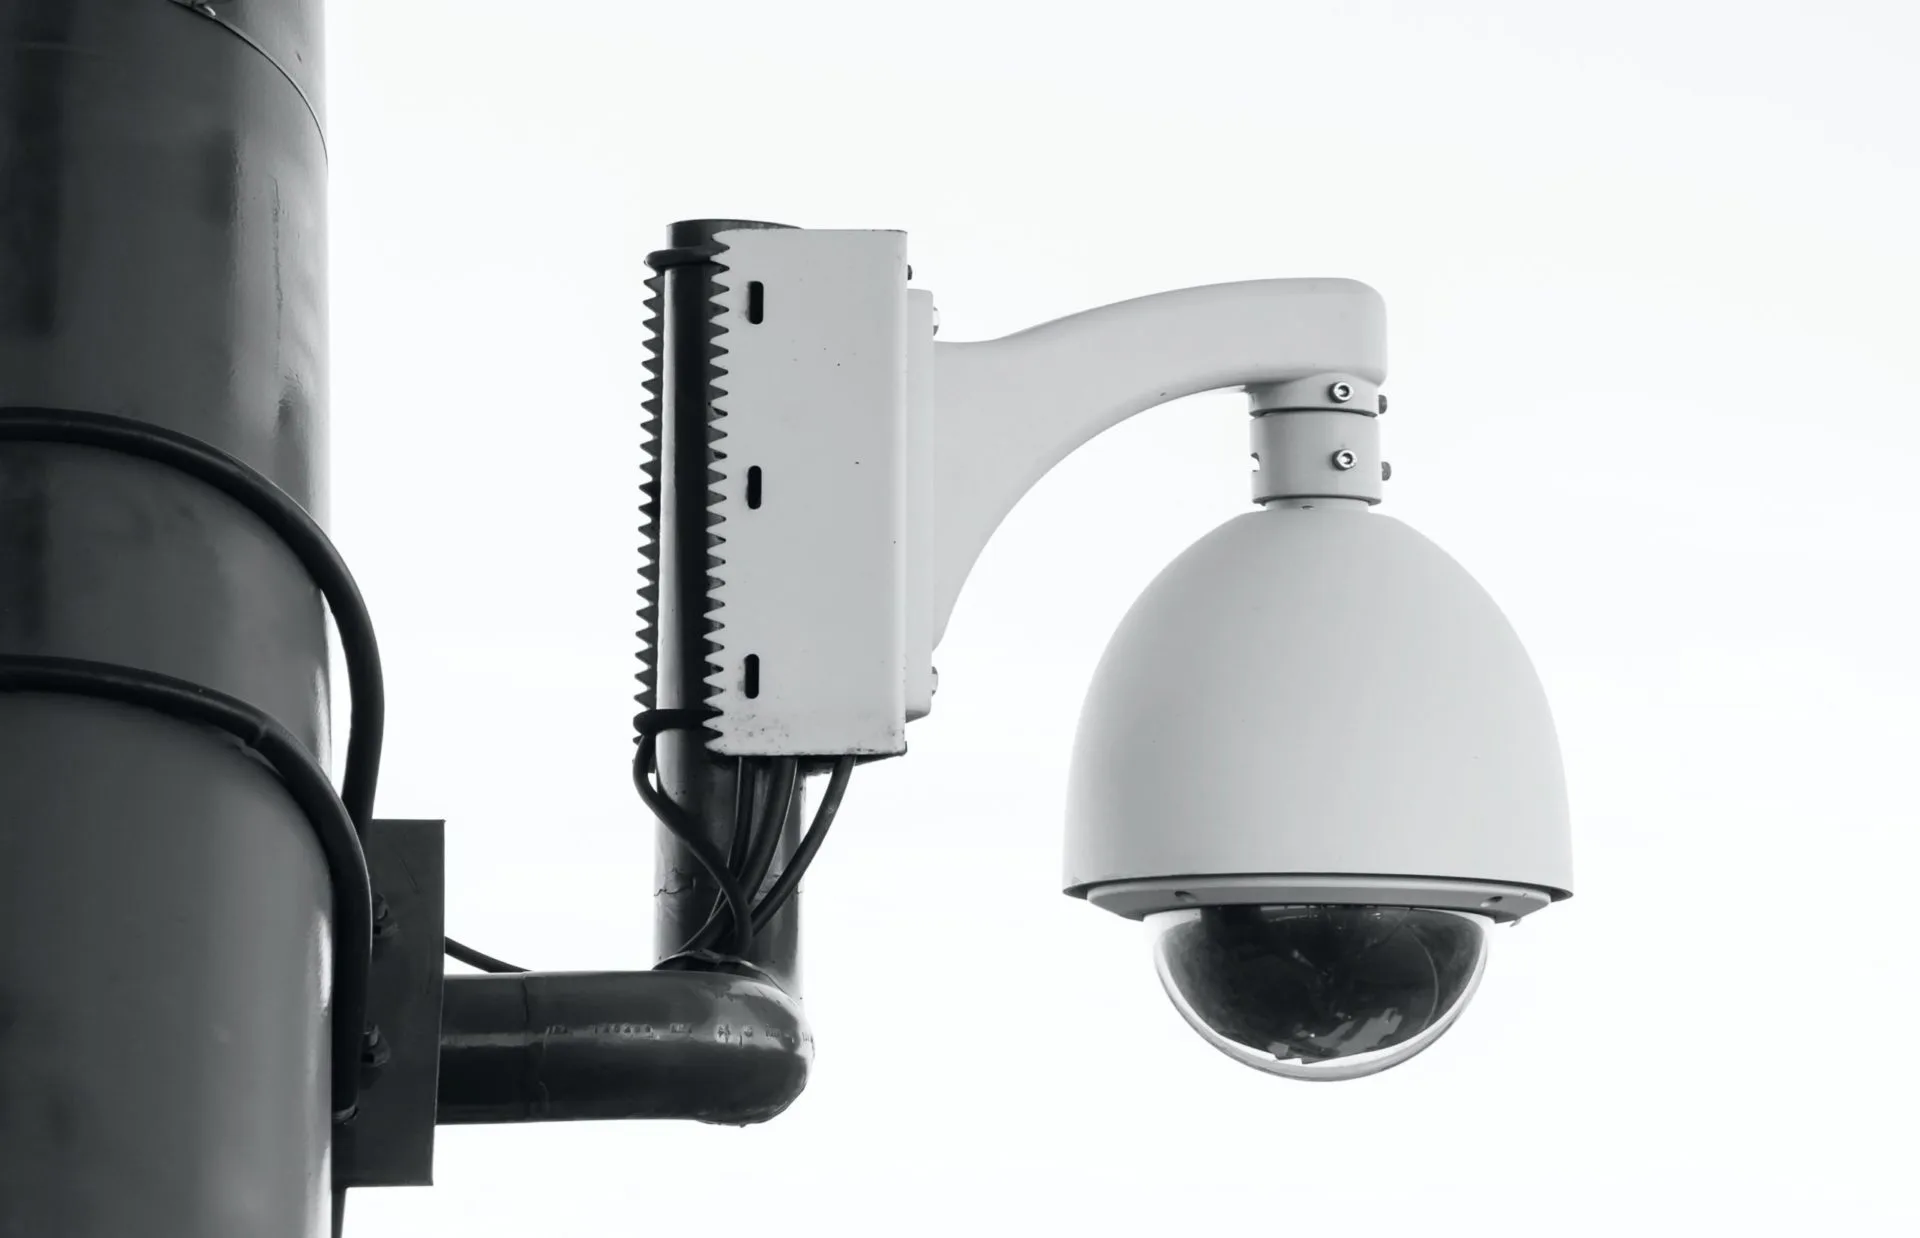 How To Take Out A Commercial CCTV Camera - A Guide For Burglars!